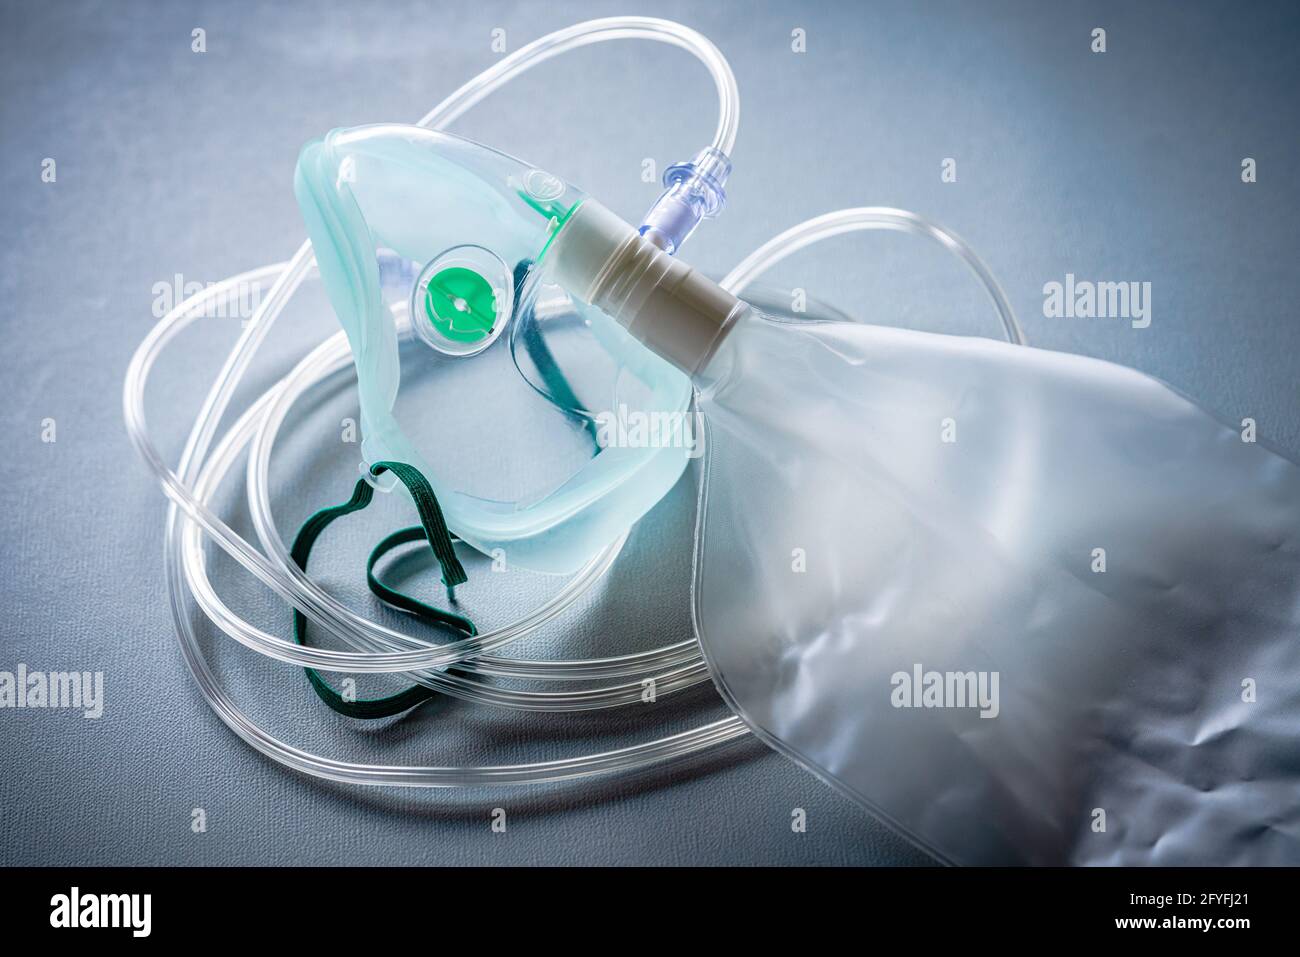 Oxygen mask, used to provide oxygen for patients. Stock Photo